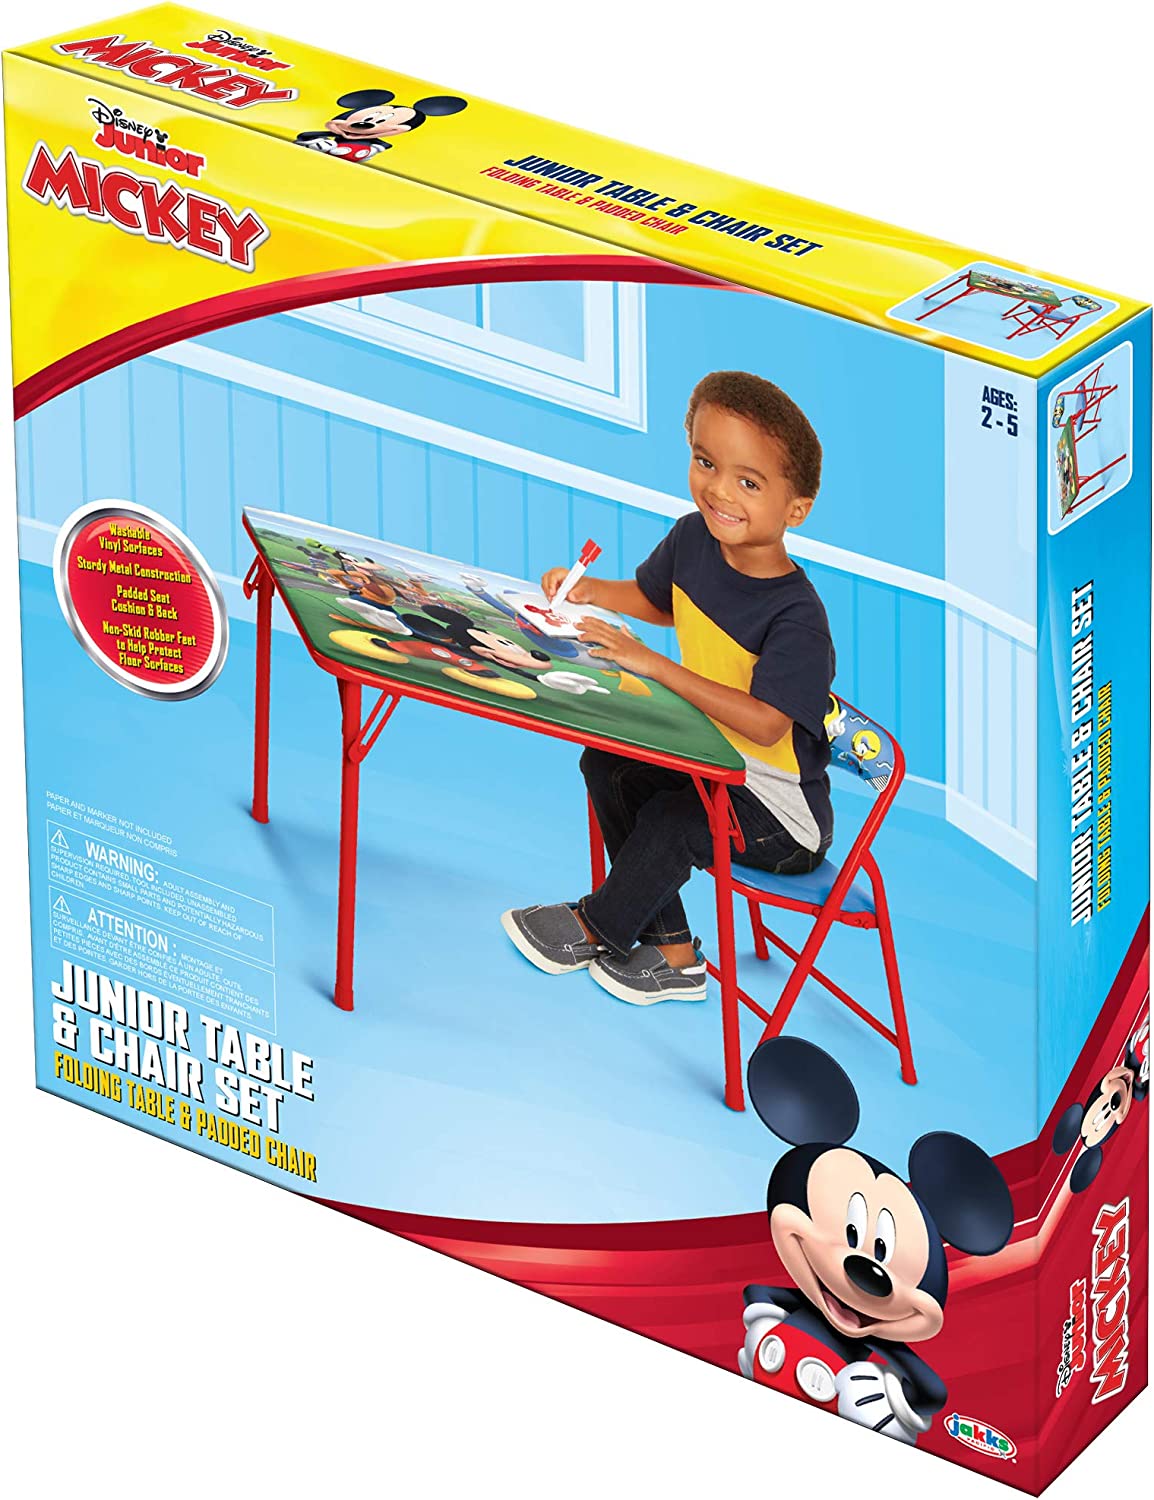 https://bigbigmart.com/wp-content/uploads/2023/05/Jakks-Pacific-Kids-Table-Chair-Set-Junior-Table-for-Toddlers-Ages-2-5-Years-20-x-20-Mickey-Mouse3.jpg